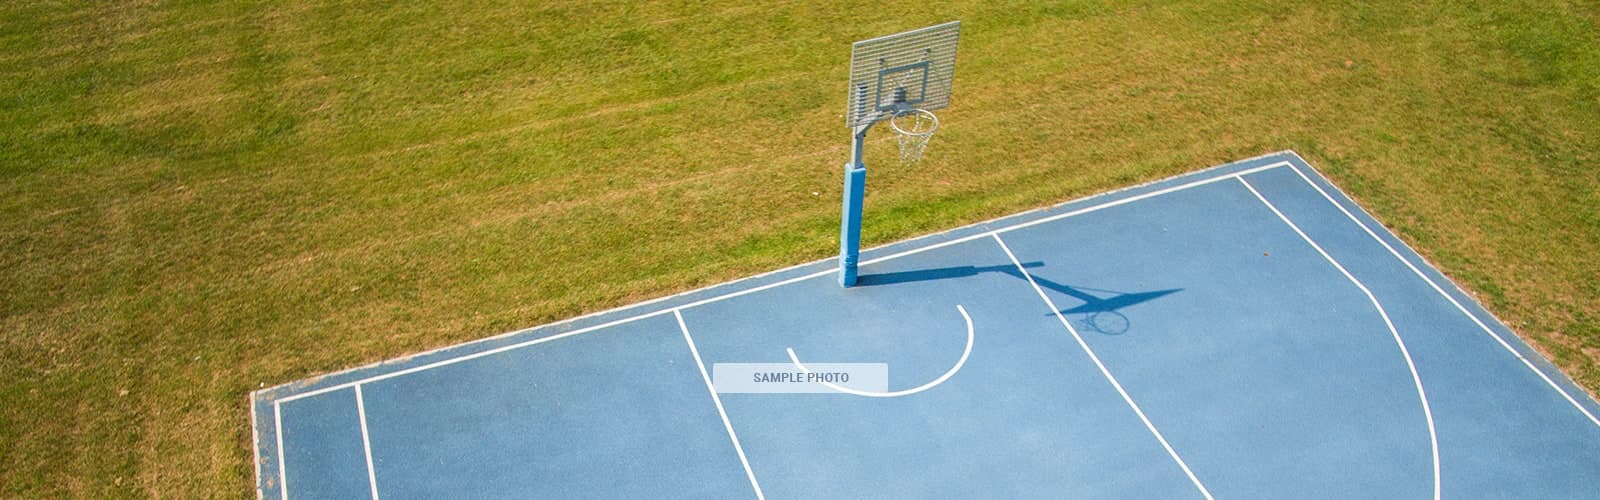 Forest Park Elementary School Blacktop / Basketball Courts in Columbus Ohio